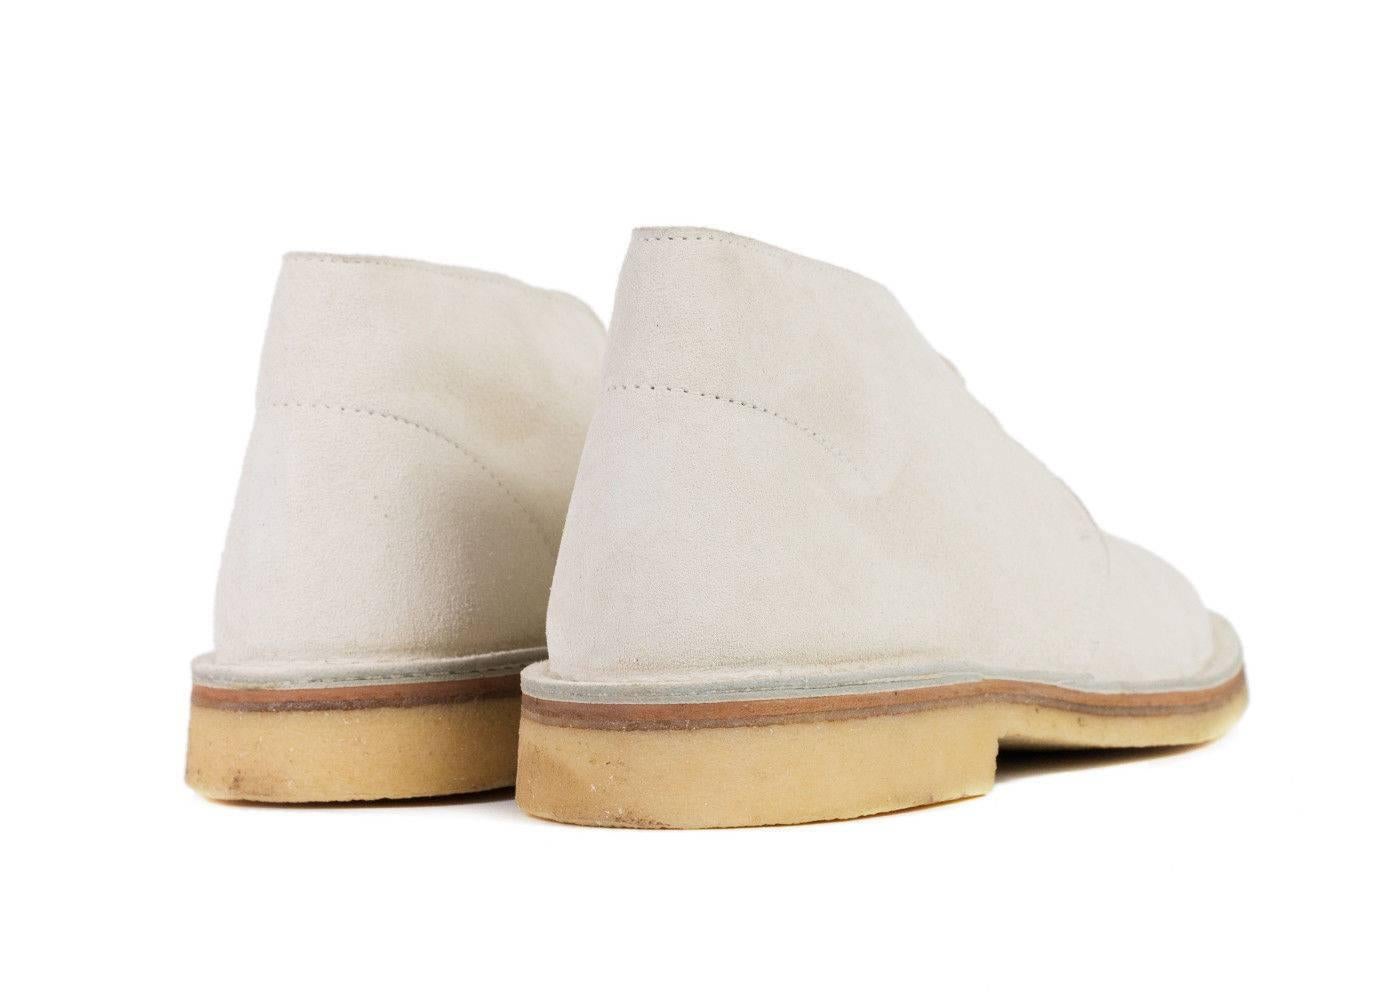 Church's Beverly Desert silhouette ankle boot in a smooth, hard-wearing sueded leather. These ankle boots are a perfect addition to your closet for this fall season. Pair these with your favorite outfit to add a chic touch and transform a simple